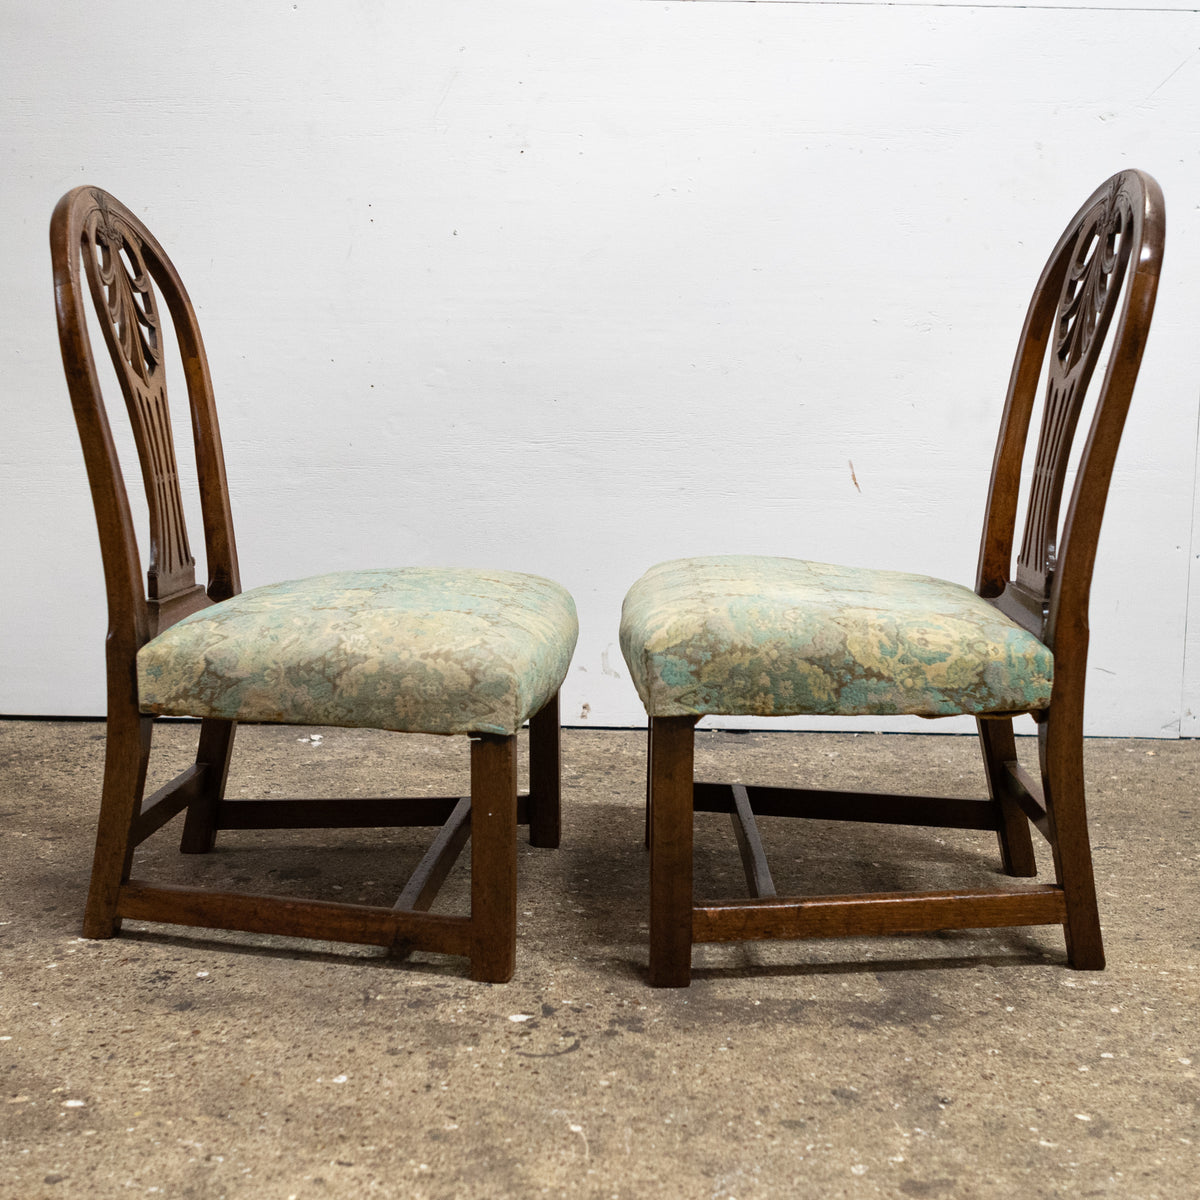 Pair of Antique Georgian Mahogany Side Chairs | The Architectural Forum